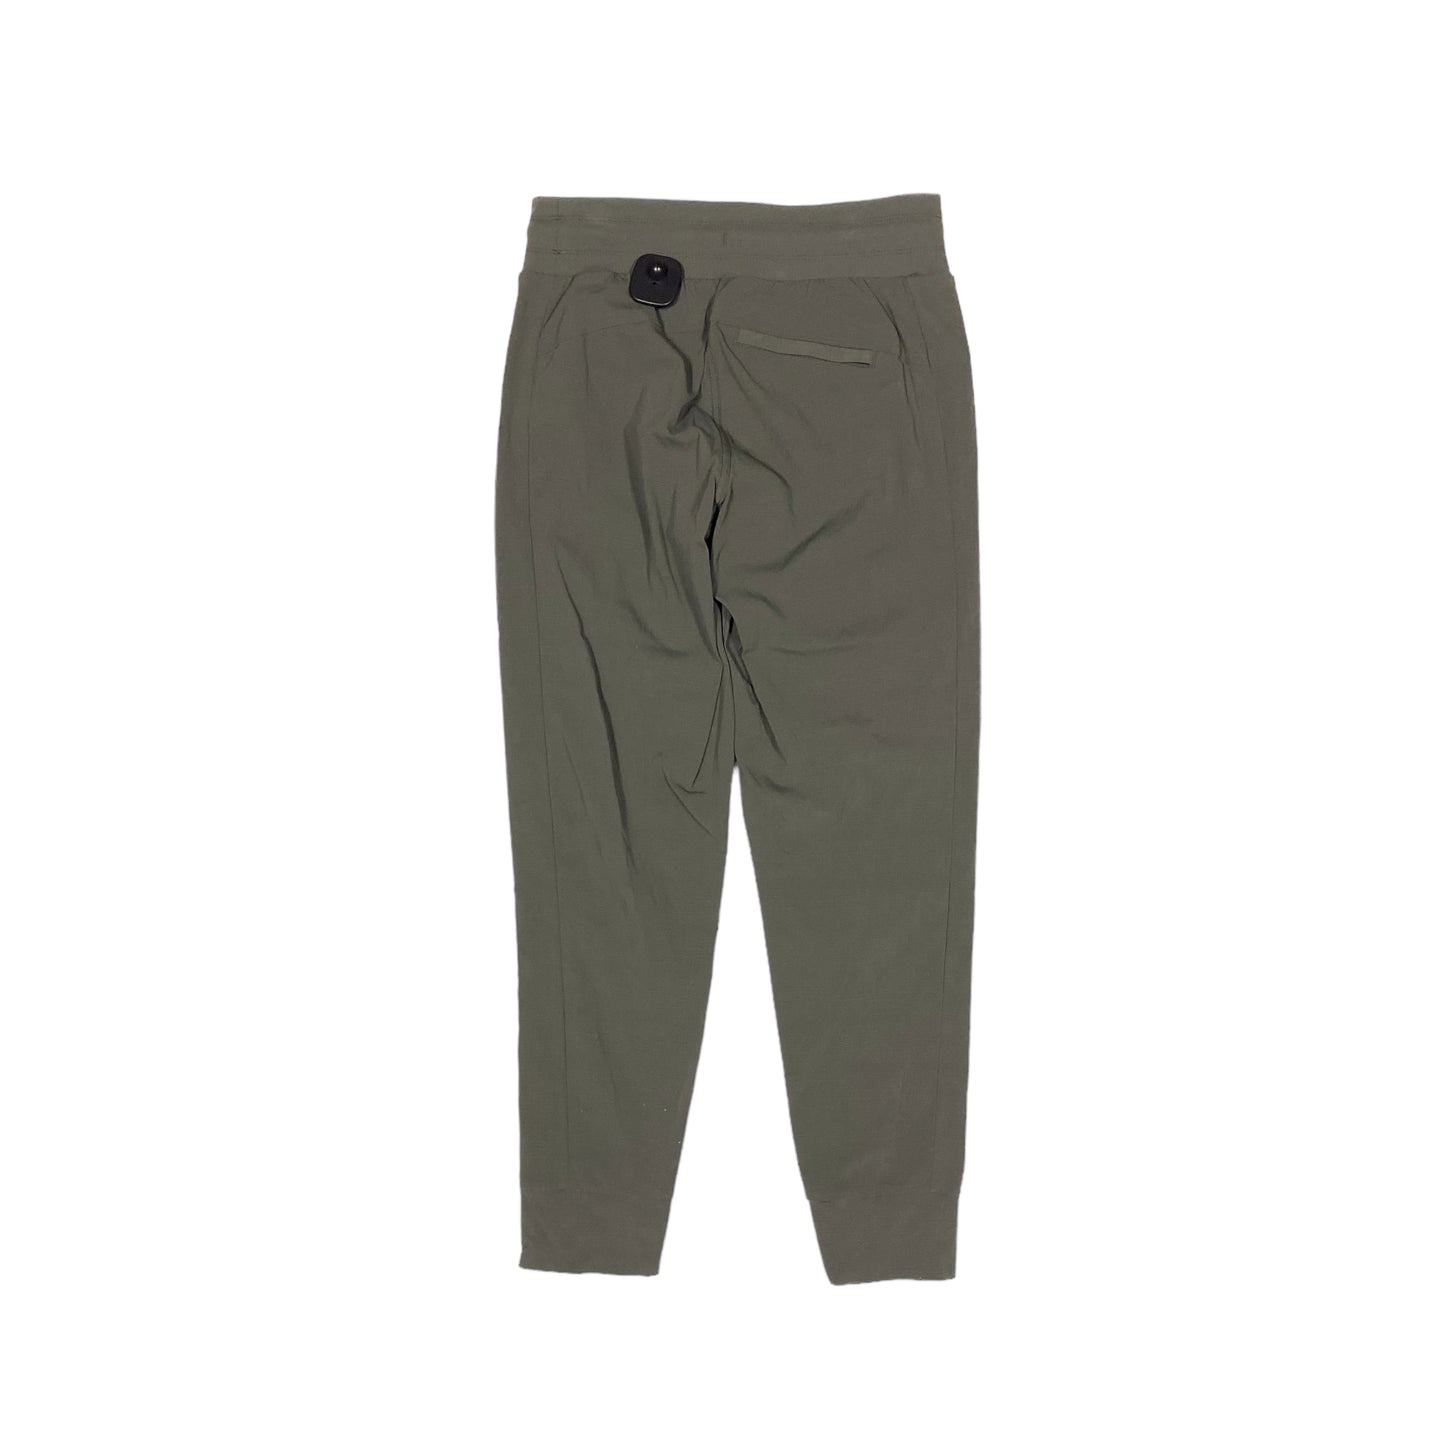 Athletic Pants By Athleta Size: 0